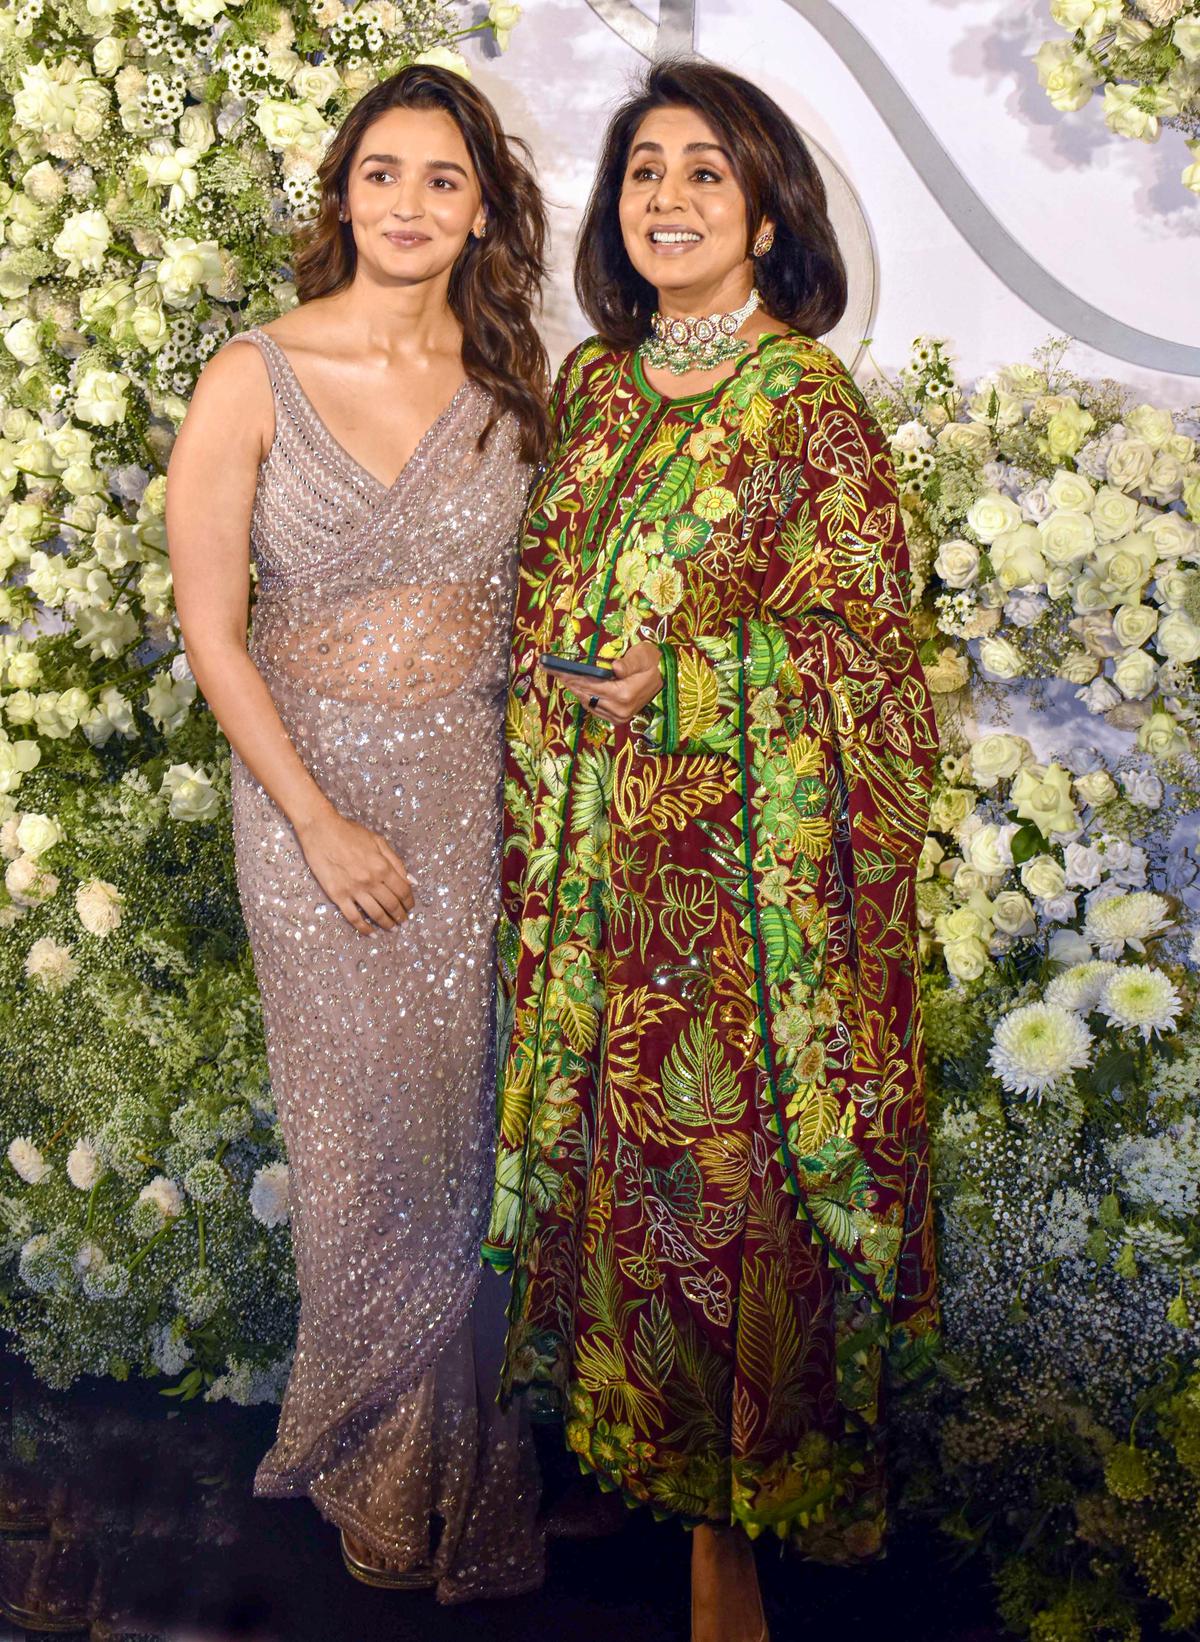 Alia Bhatt and Neetu Kapoor posed for pictures at the wedding reception